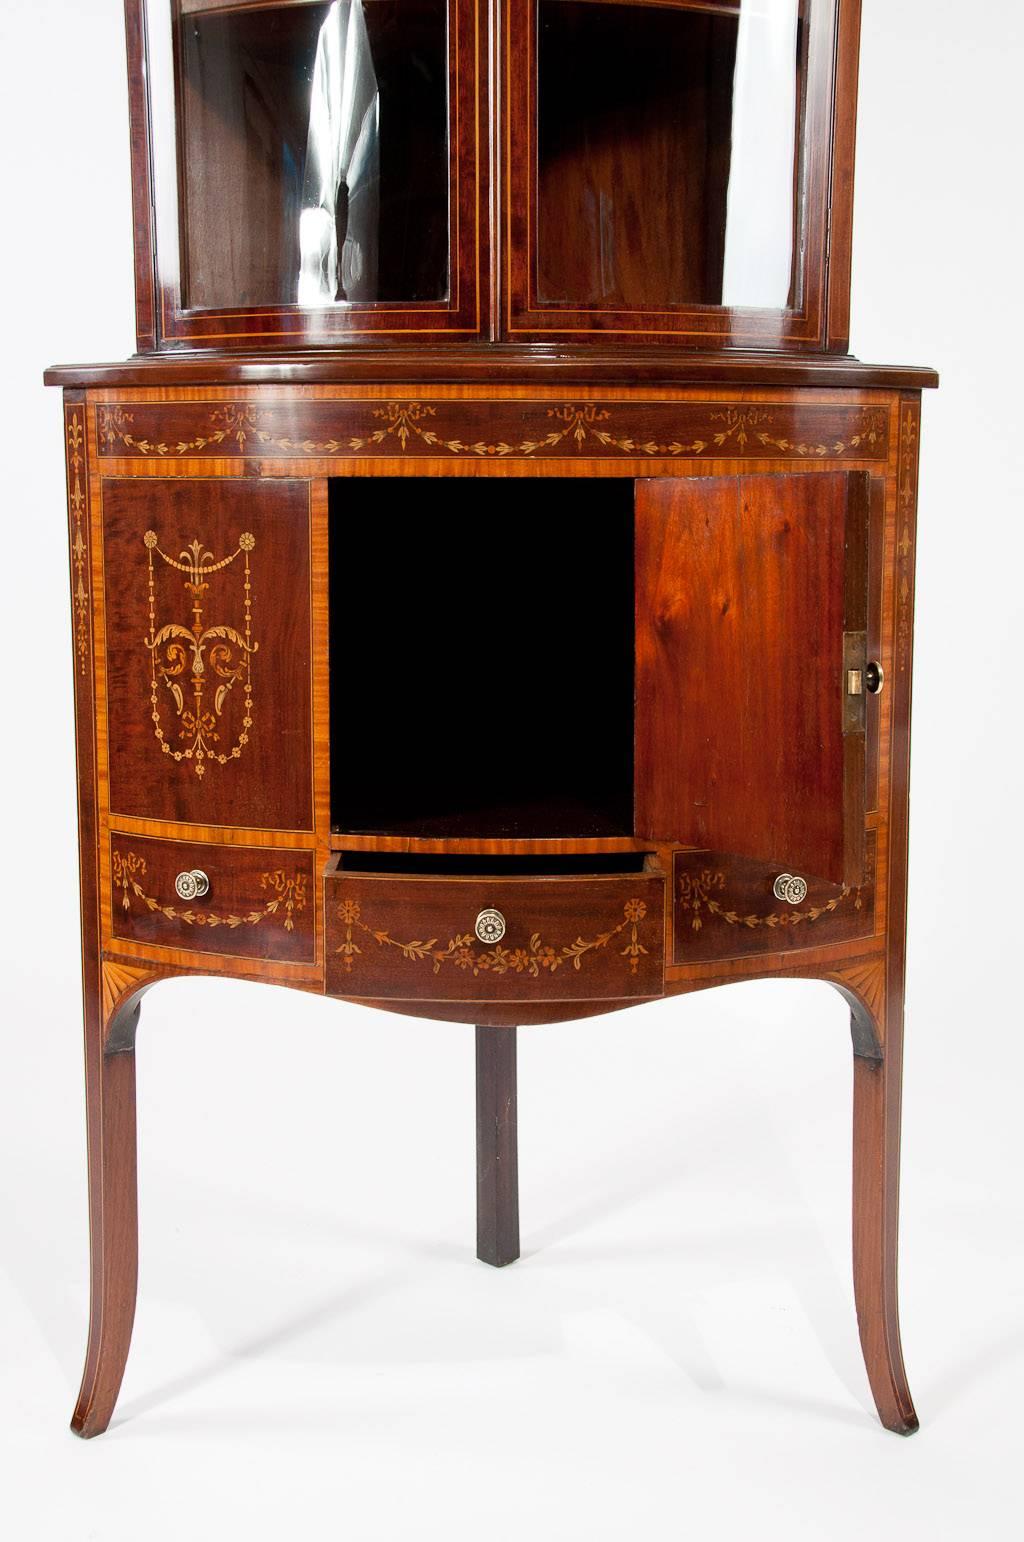 Late 19th Century Antique Bowfront Inlaid Corner Cabinet